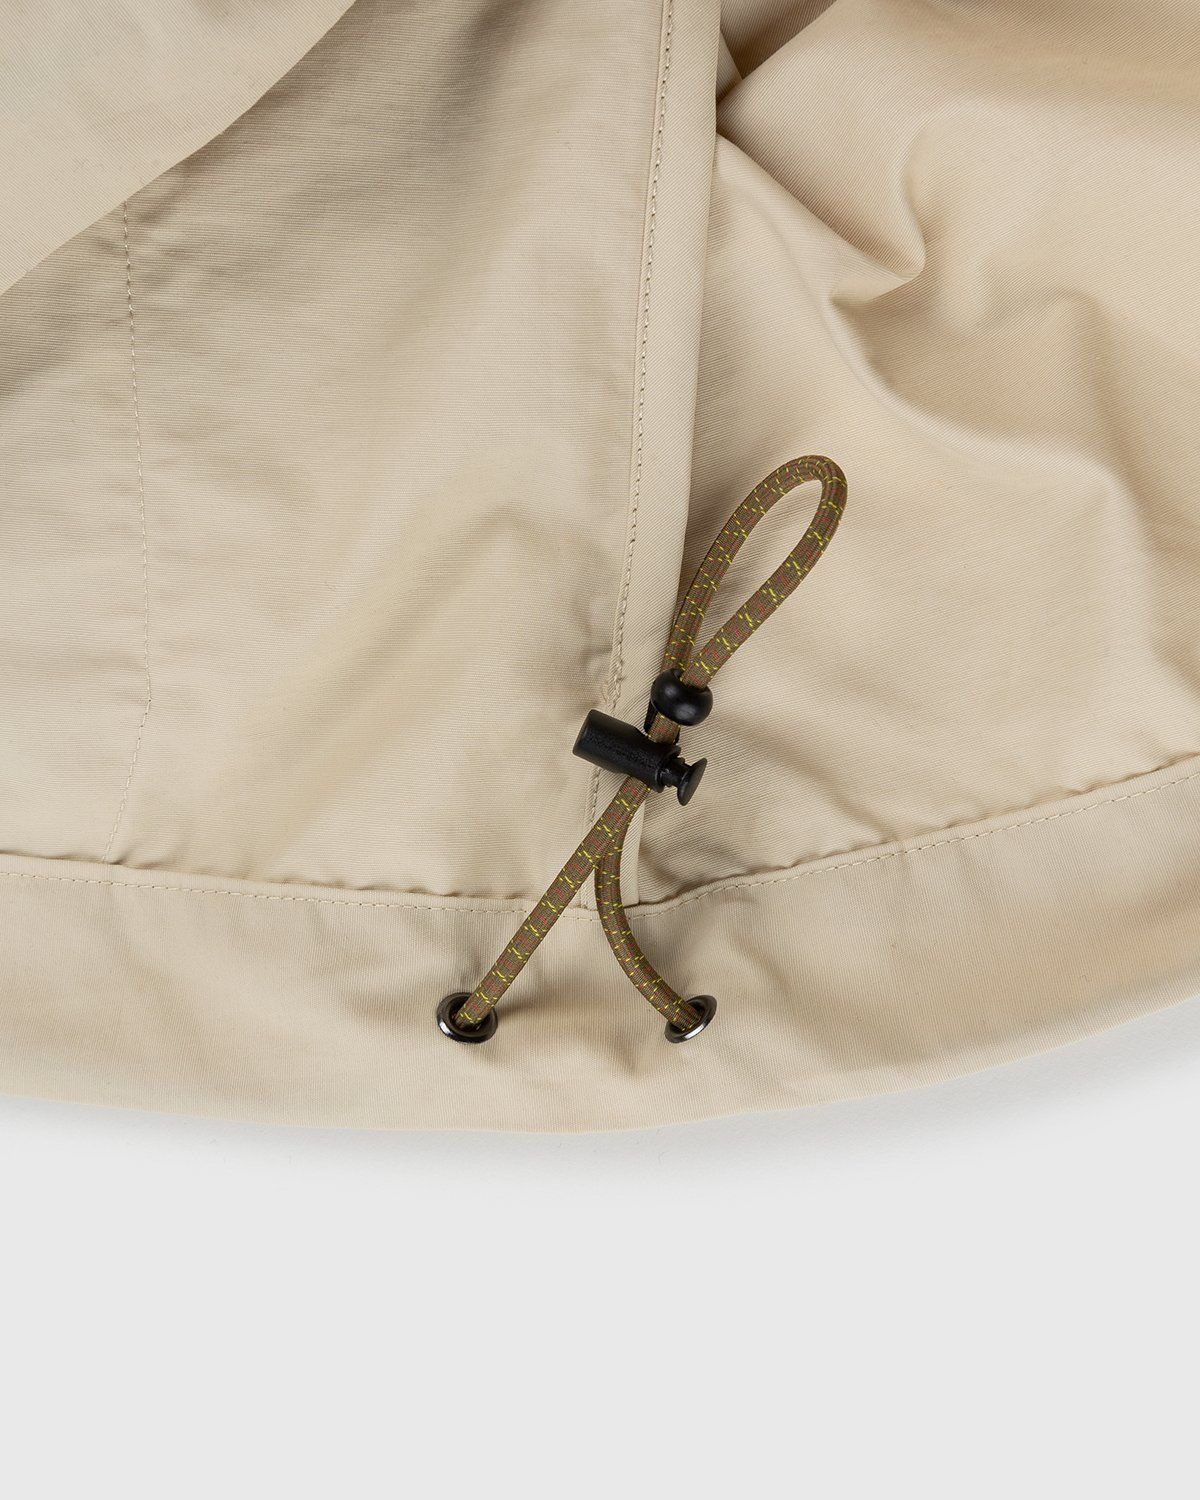 The North Face – Sky Valley Windbreaker Jacket Gravel - Outerwear - Beige - Image 5